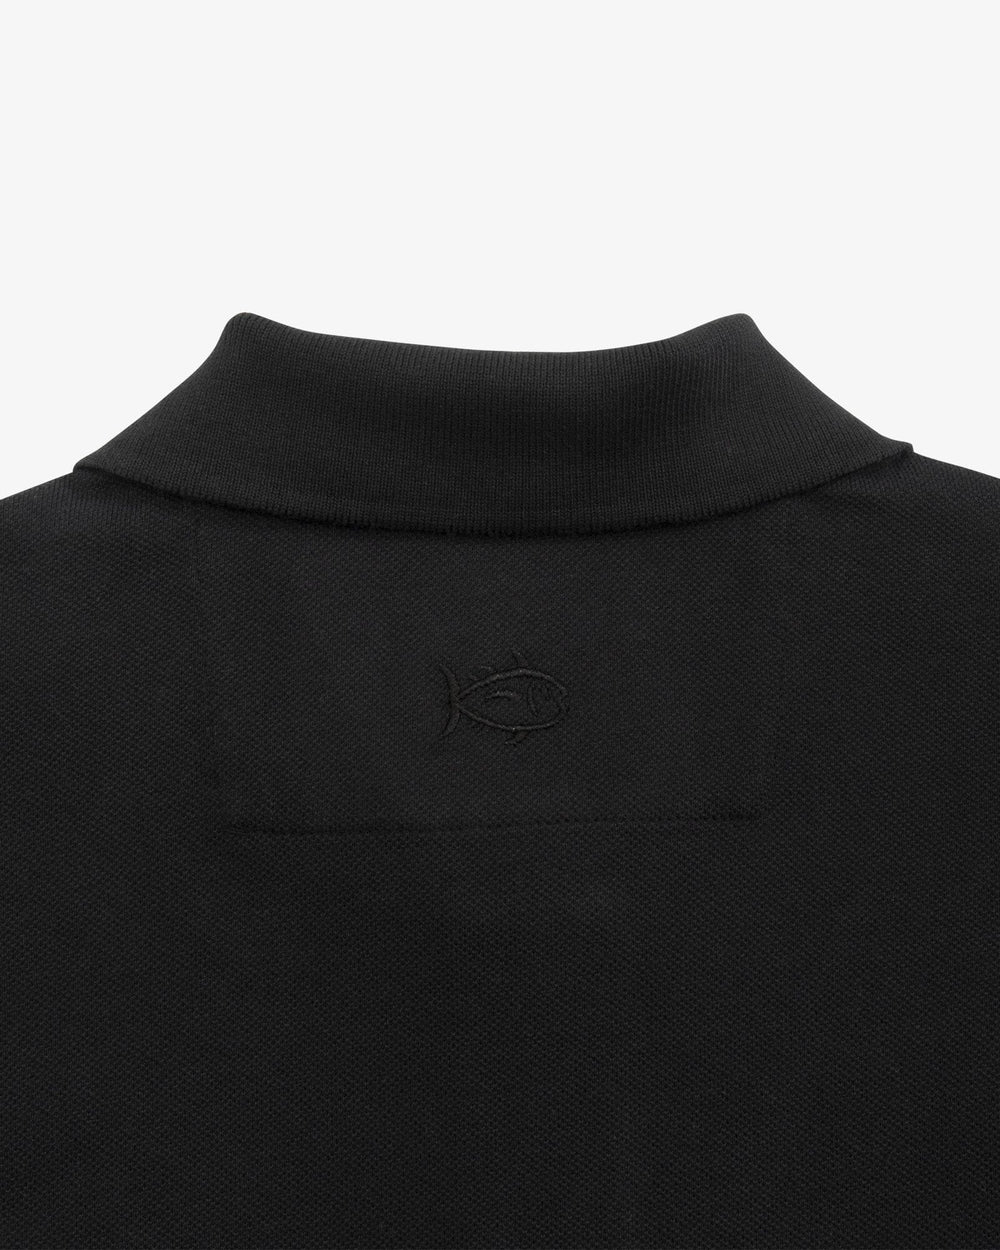 The yoke view of the Vanderbilt Commodores Skipjack Polo by Southern Tide - Black